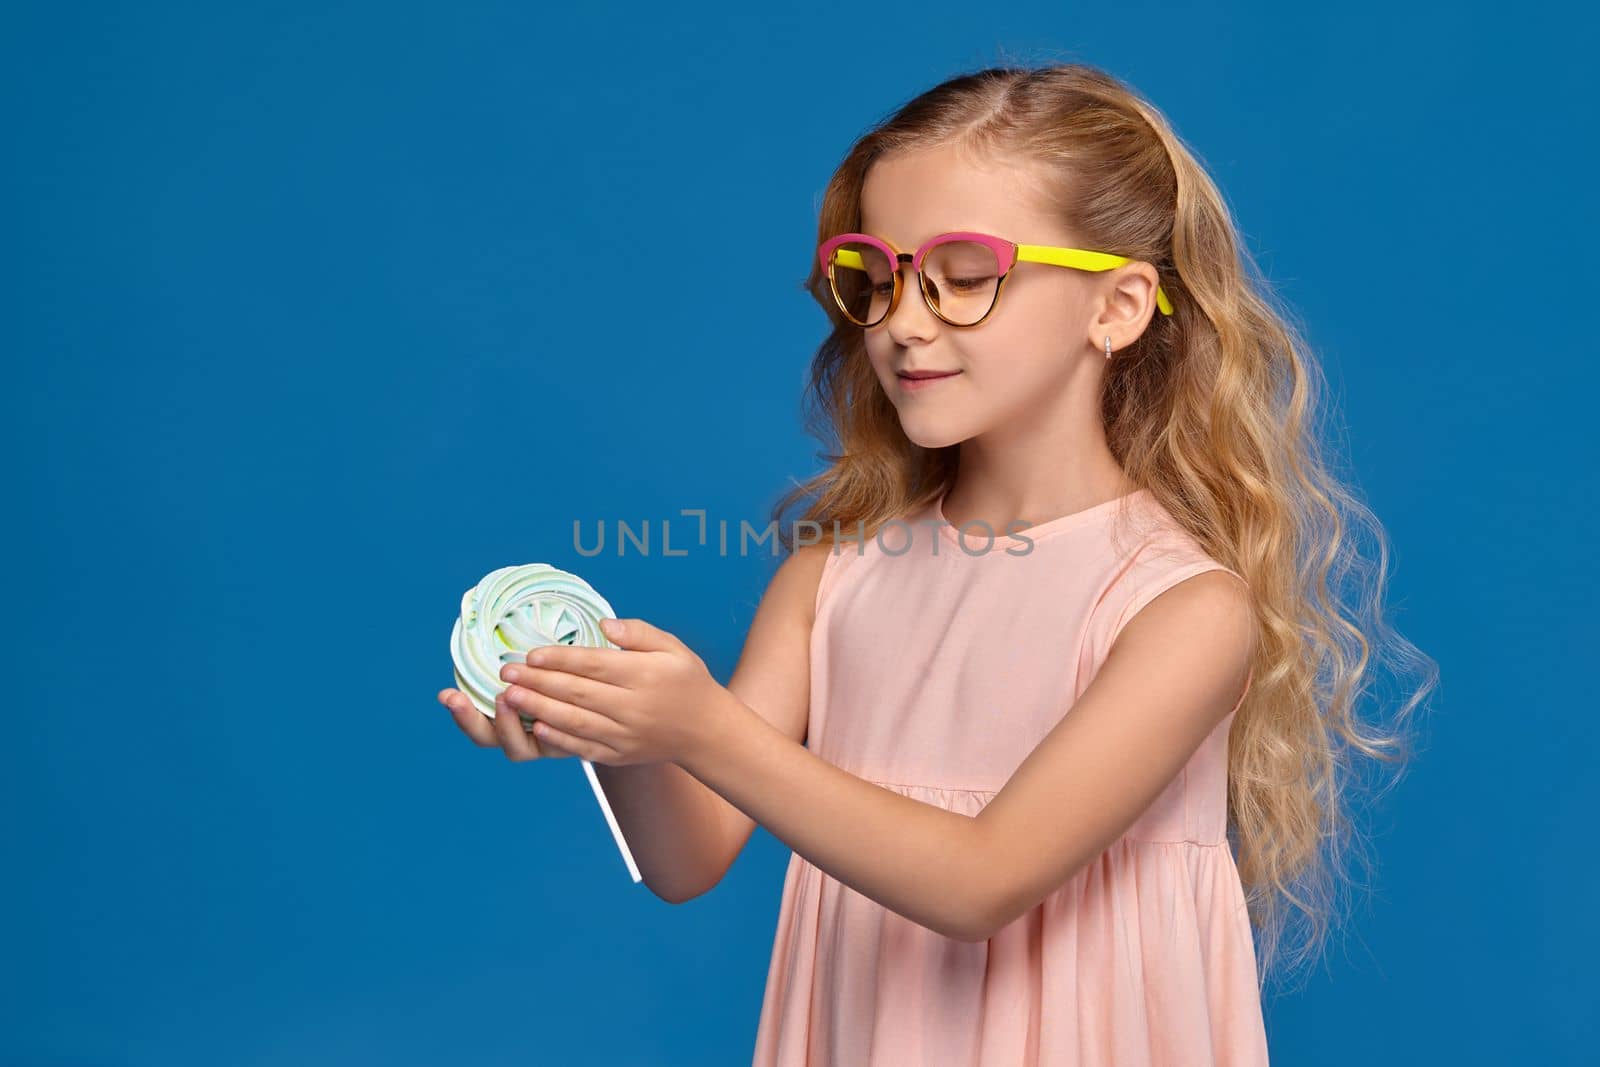 Charming little girl in a pink dress and a fashionable glasses is holding a candy, standing on a blue background.